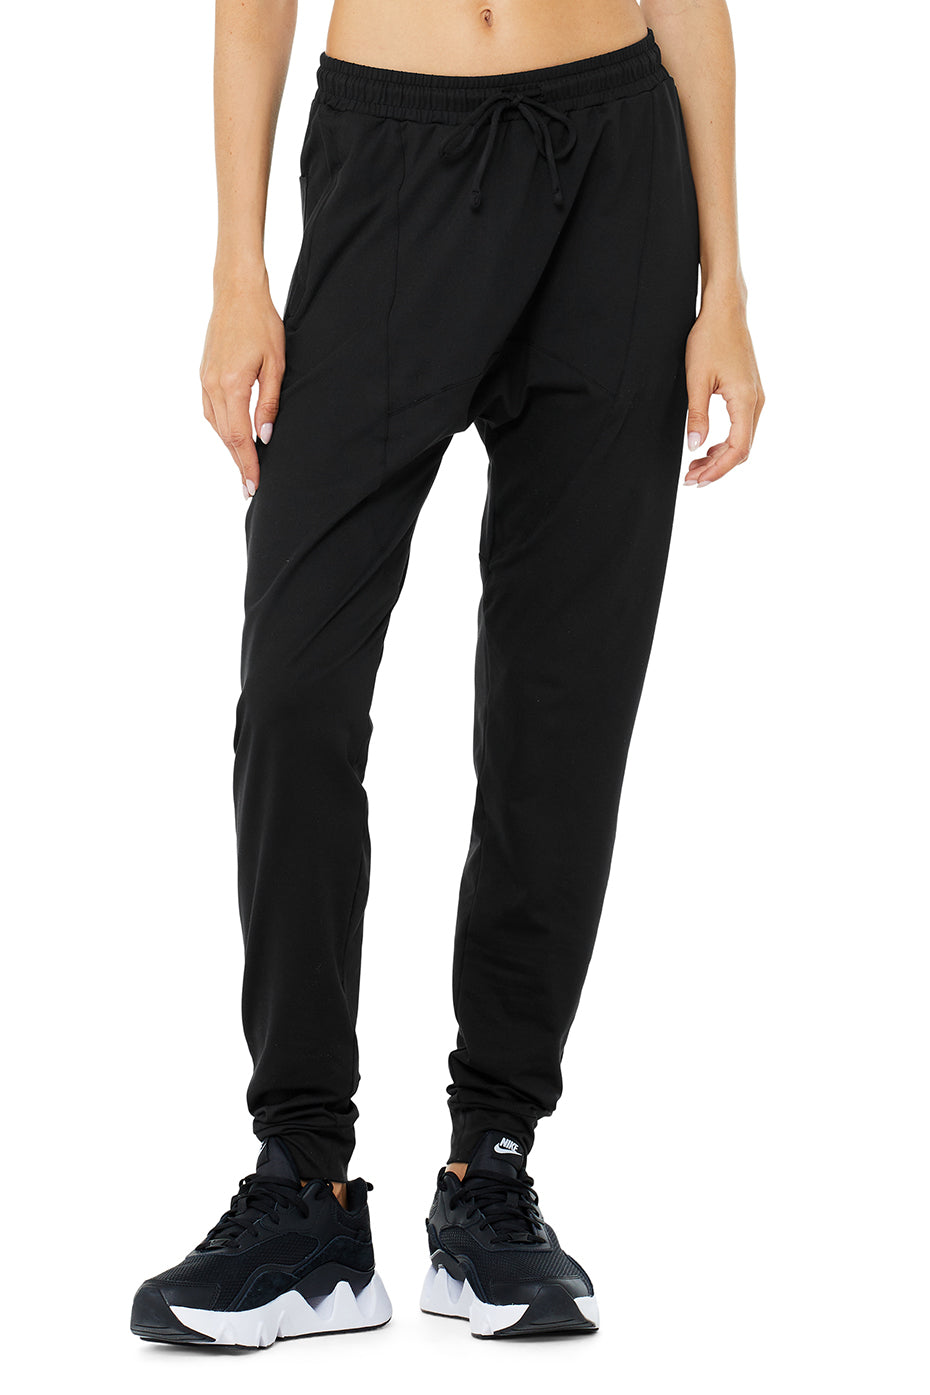 ALO YOGA Trousers Alo Cotton For Female XS International for Women